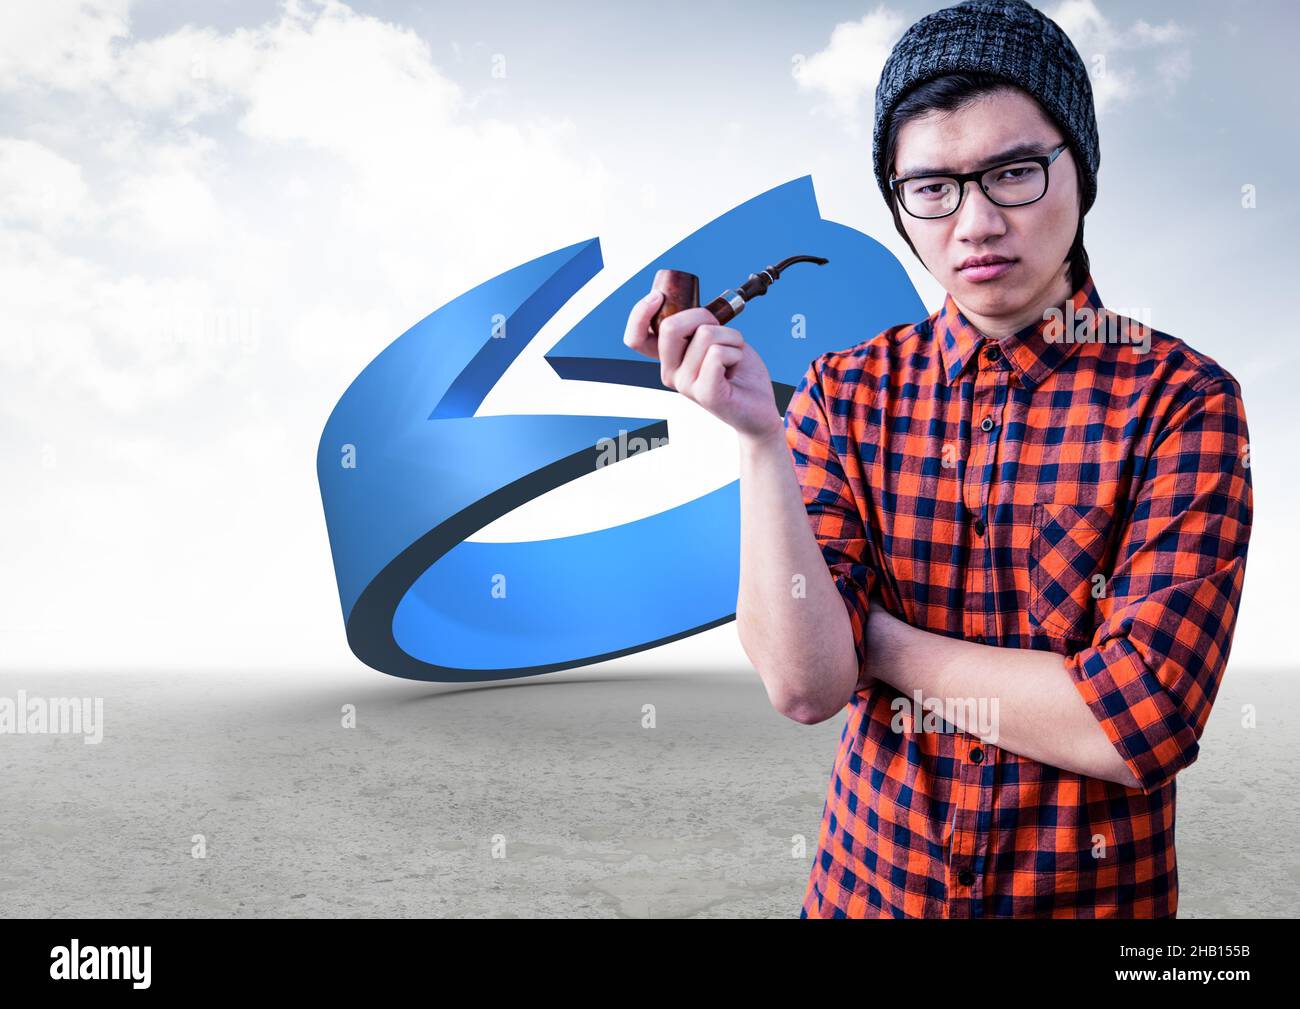 Composite image of asian man holding a smoke pipe against blue arrow icon over blue sky Stock Photo